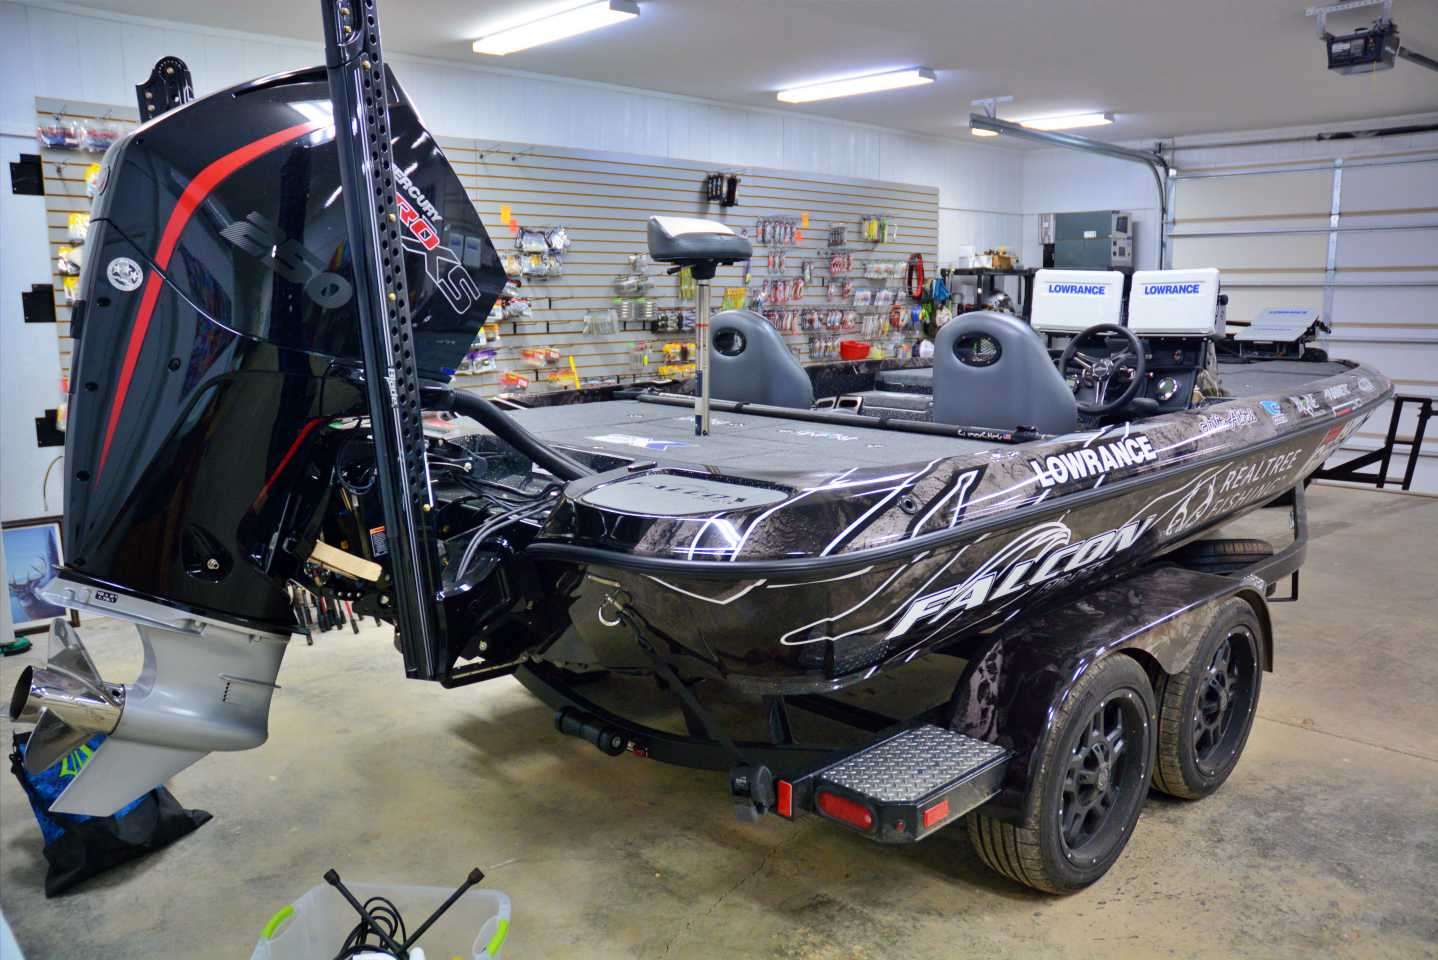 Call it a work in progress. Out with the old, in with the new. Justin Atkins had just unloaded his 2020 model Falcon Boats rig, with most of the contents on the floor surrounding his latest ride. 